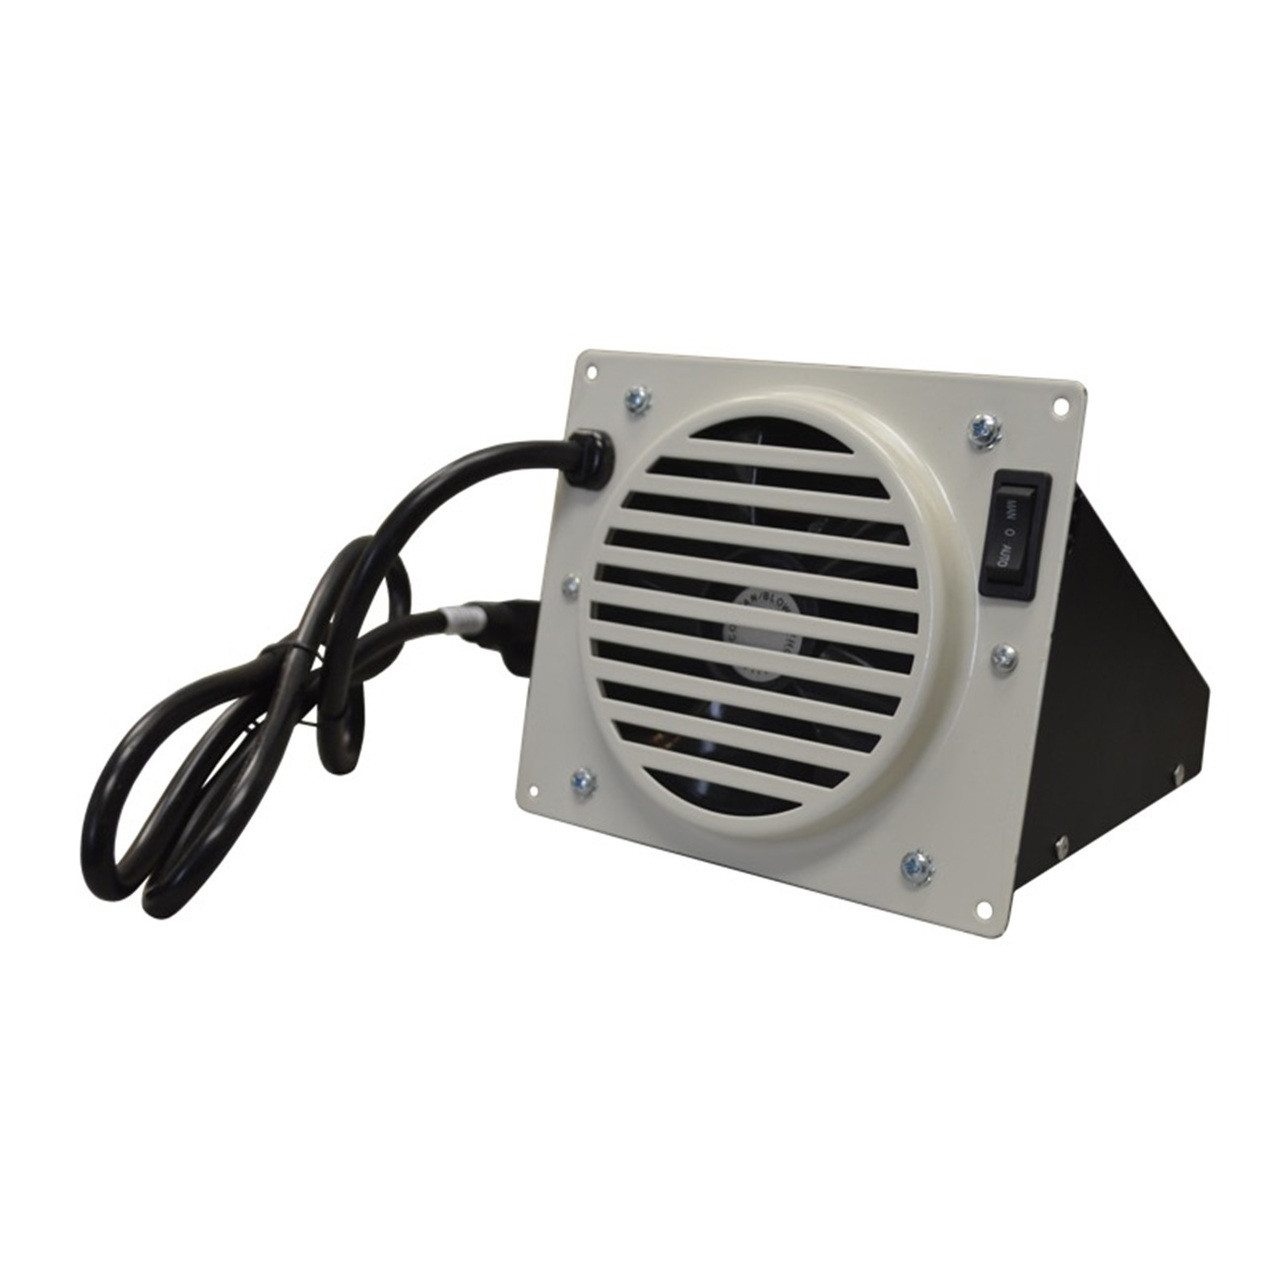 Fan Blower For Avenger Space Heaters Model Mgb100 Factory Buys Direct